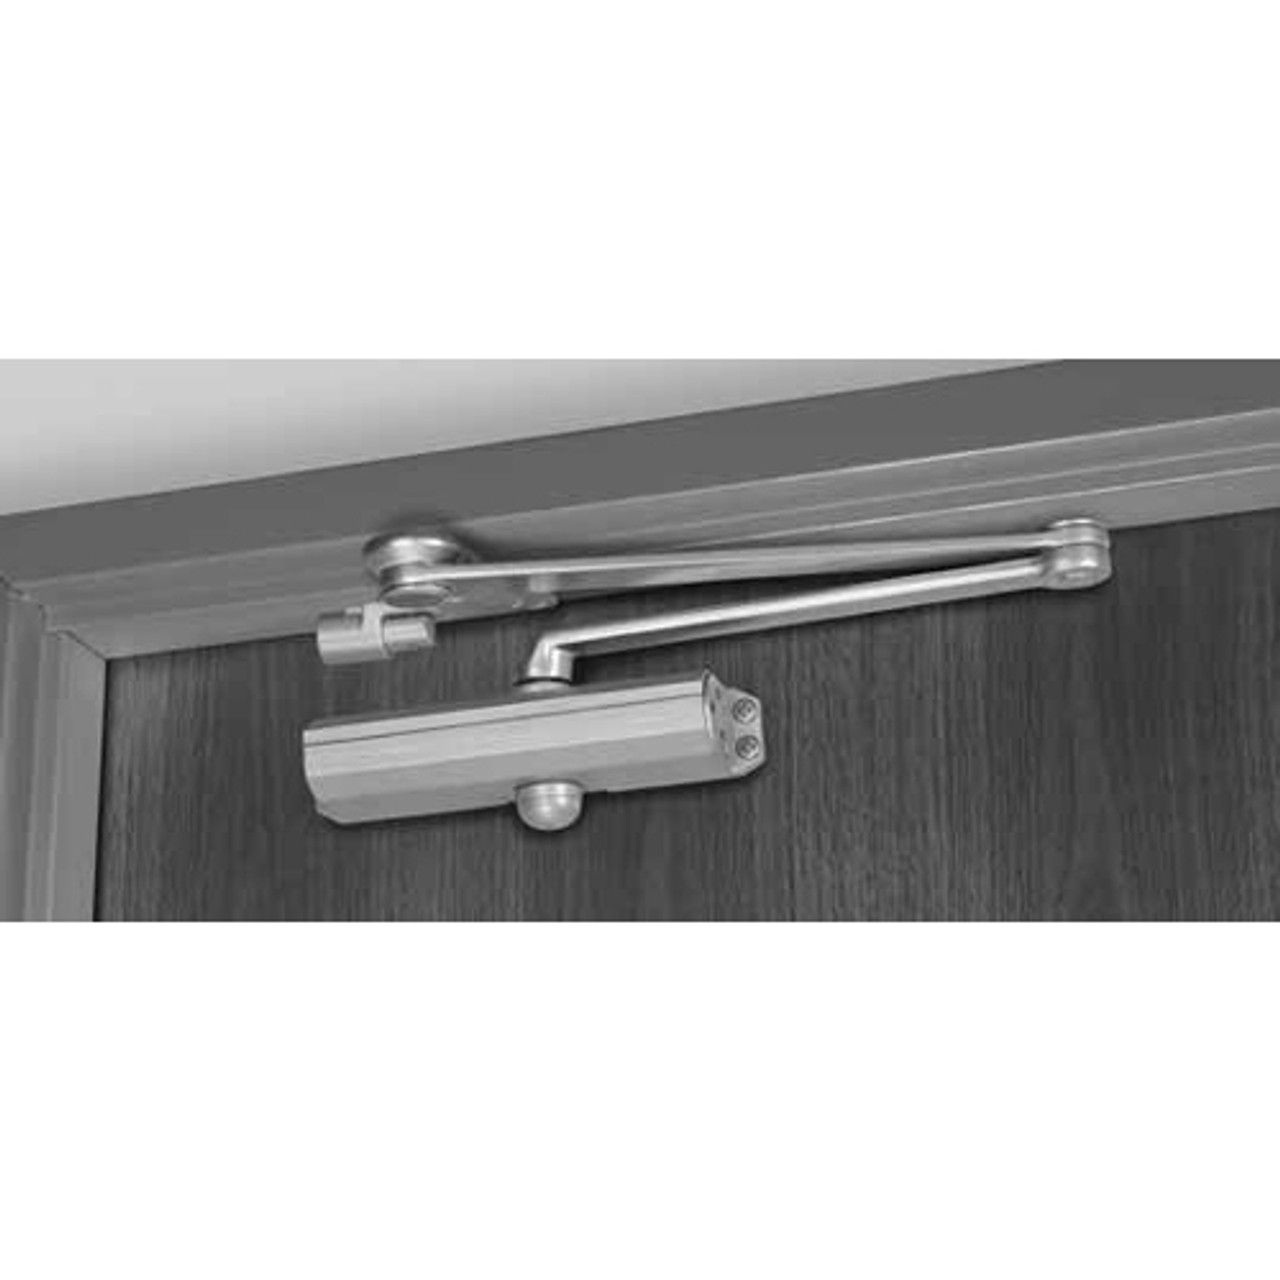 CPS1601T-693 Norton 1600 Series Hold Open Adjustable Door Closer with CloserPlus Spring Arm in Black